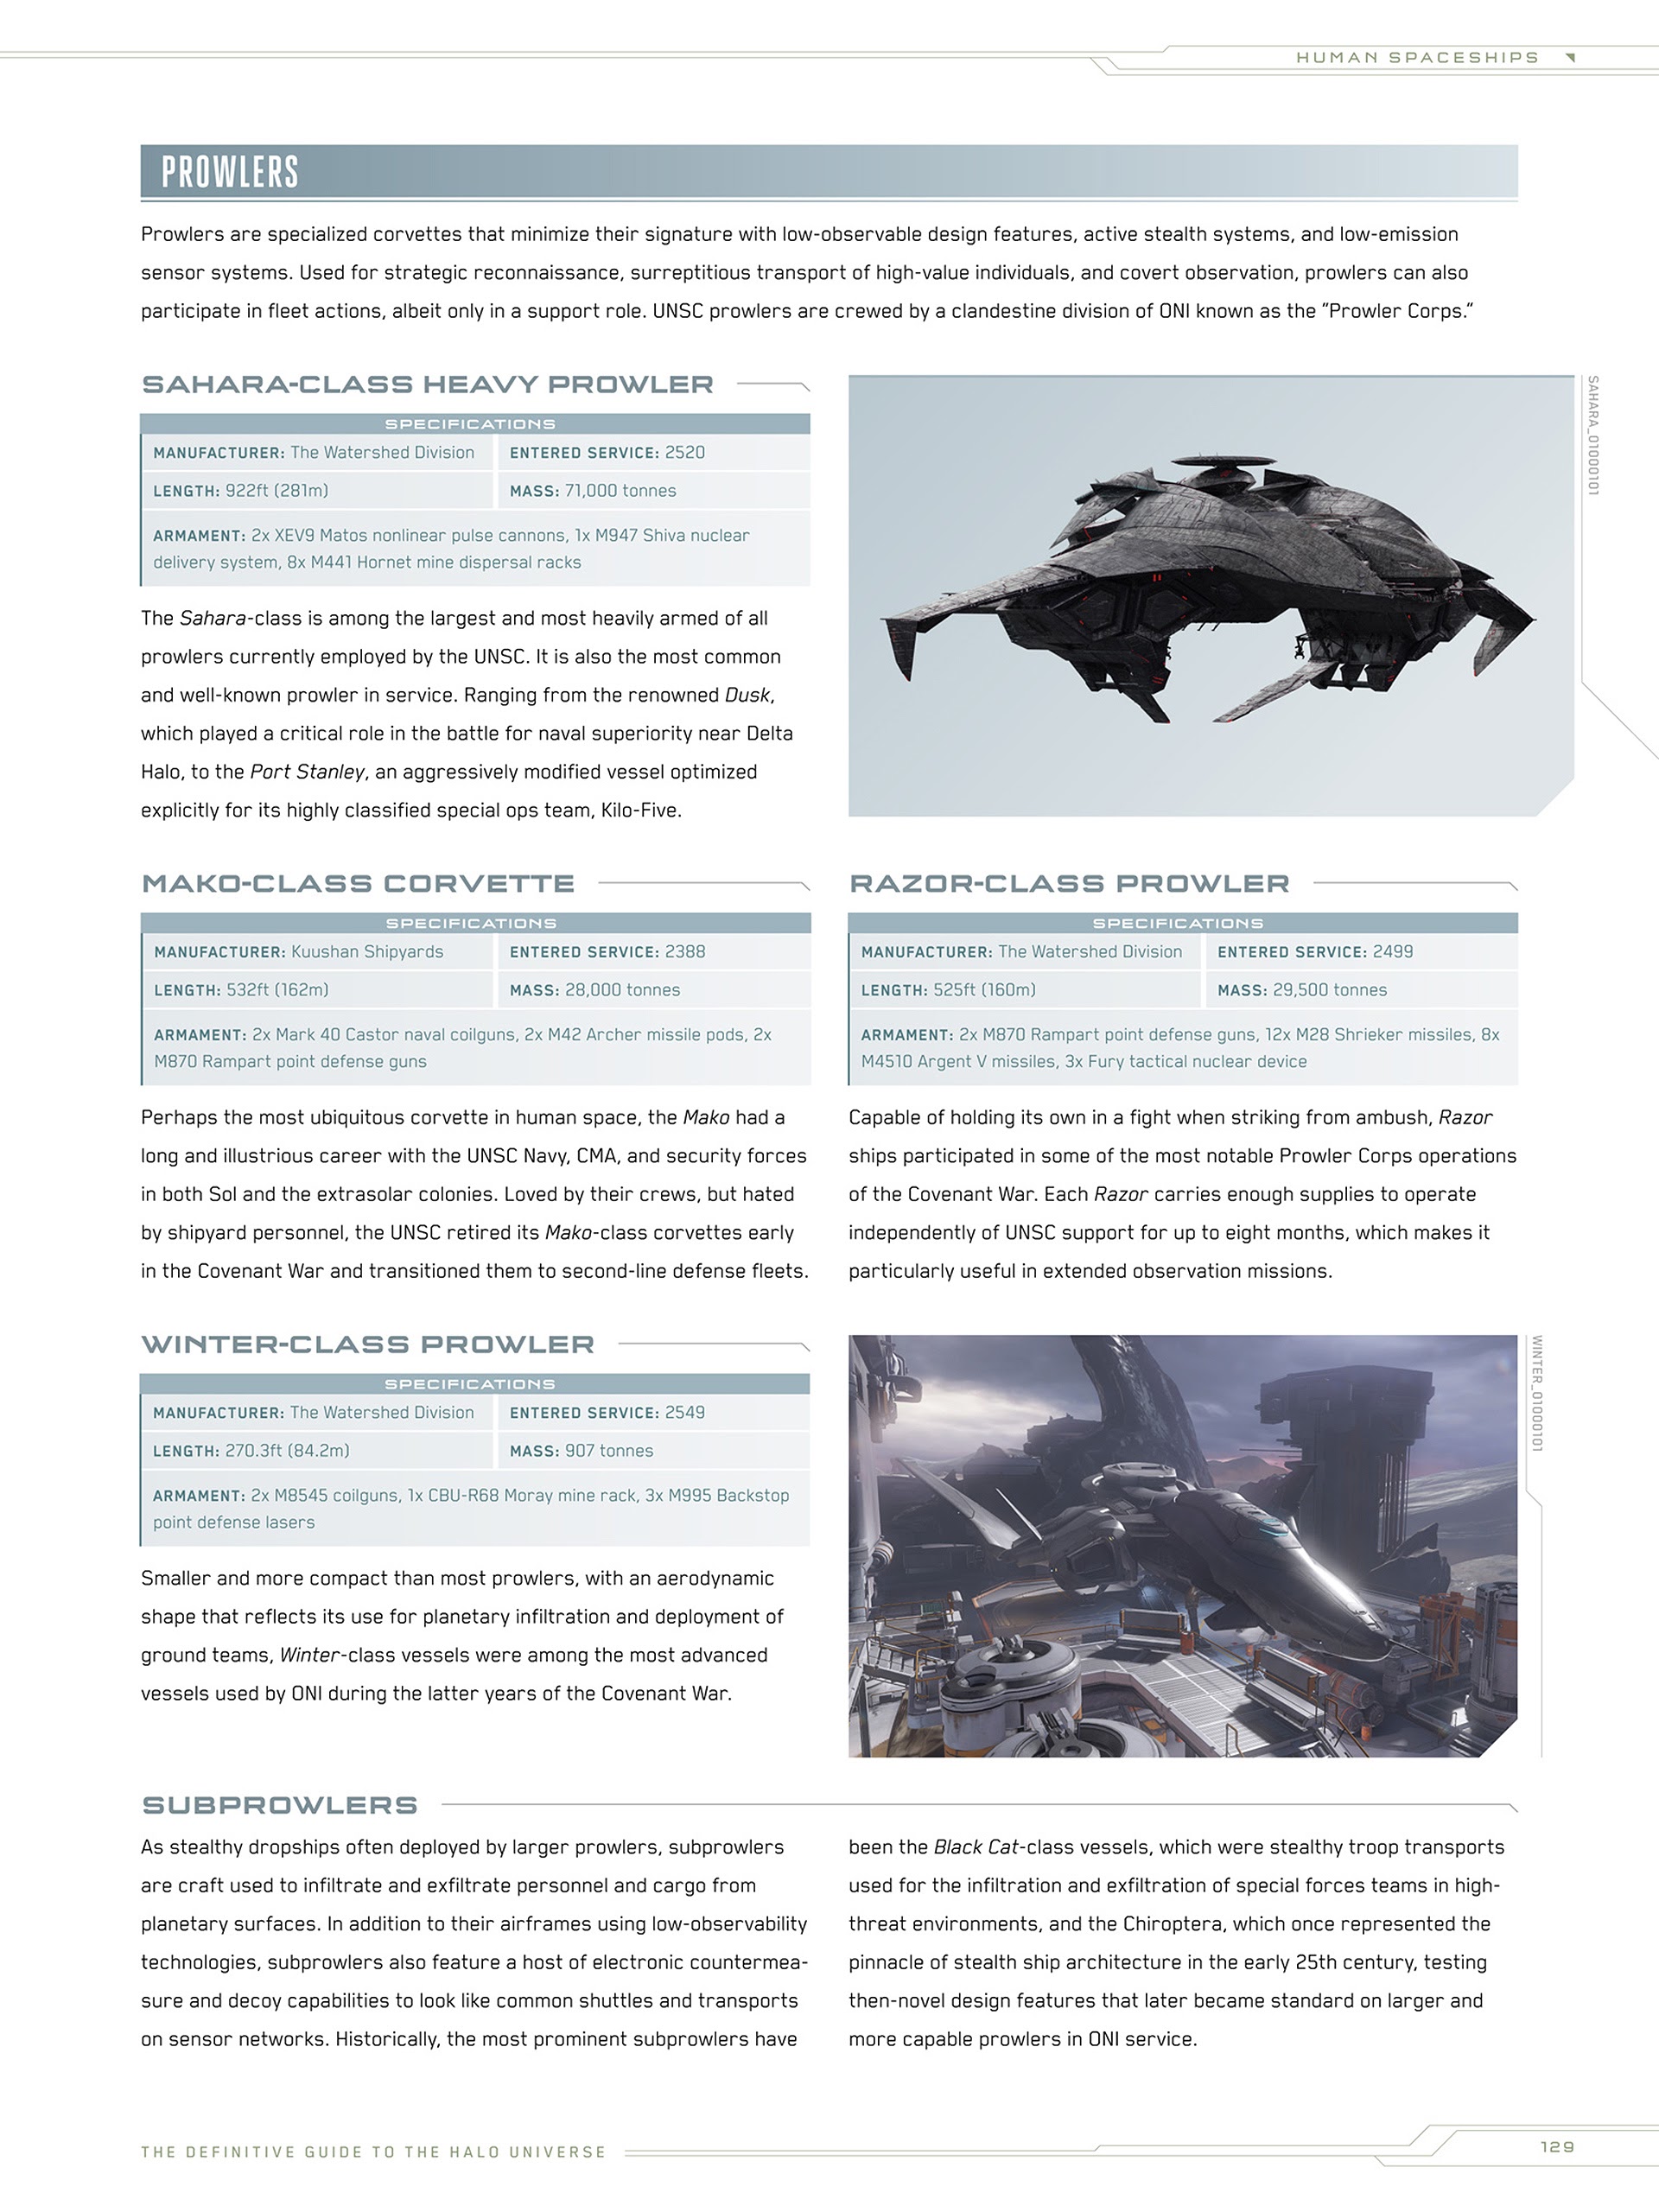 Read online Halo Encyclopedia comic -  Issue # TPB (Part 2) - 26